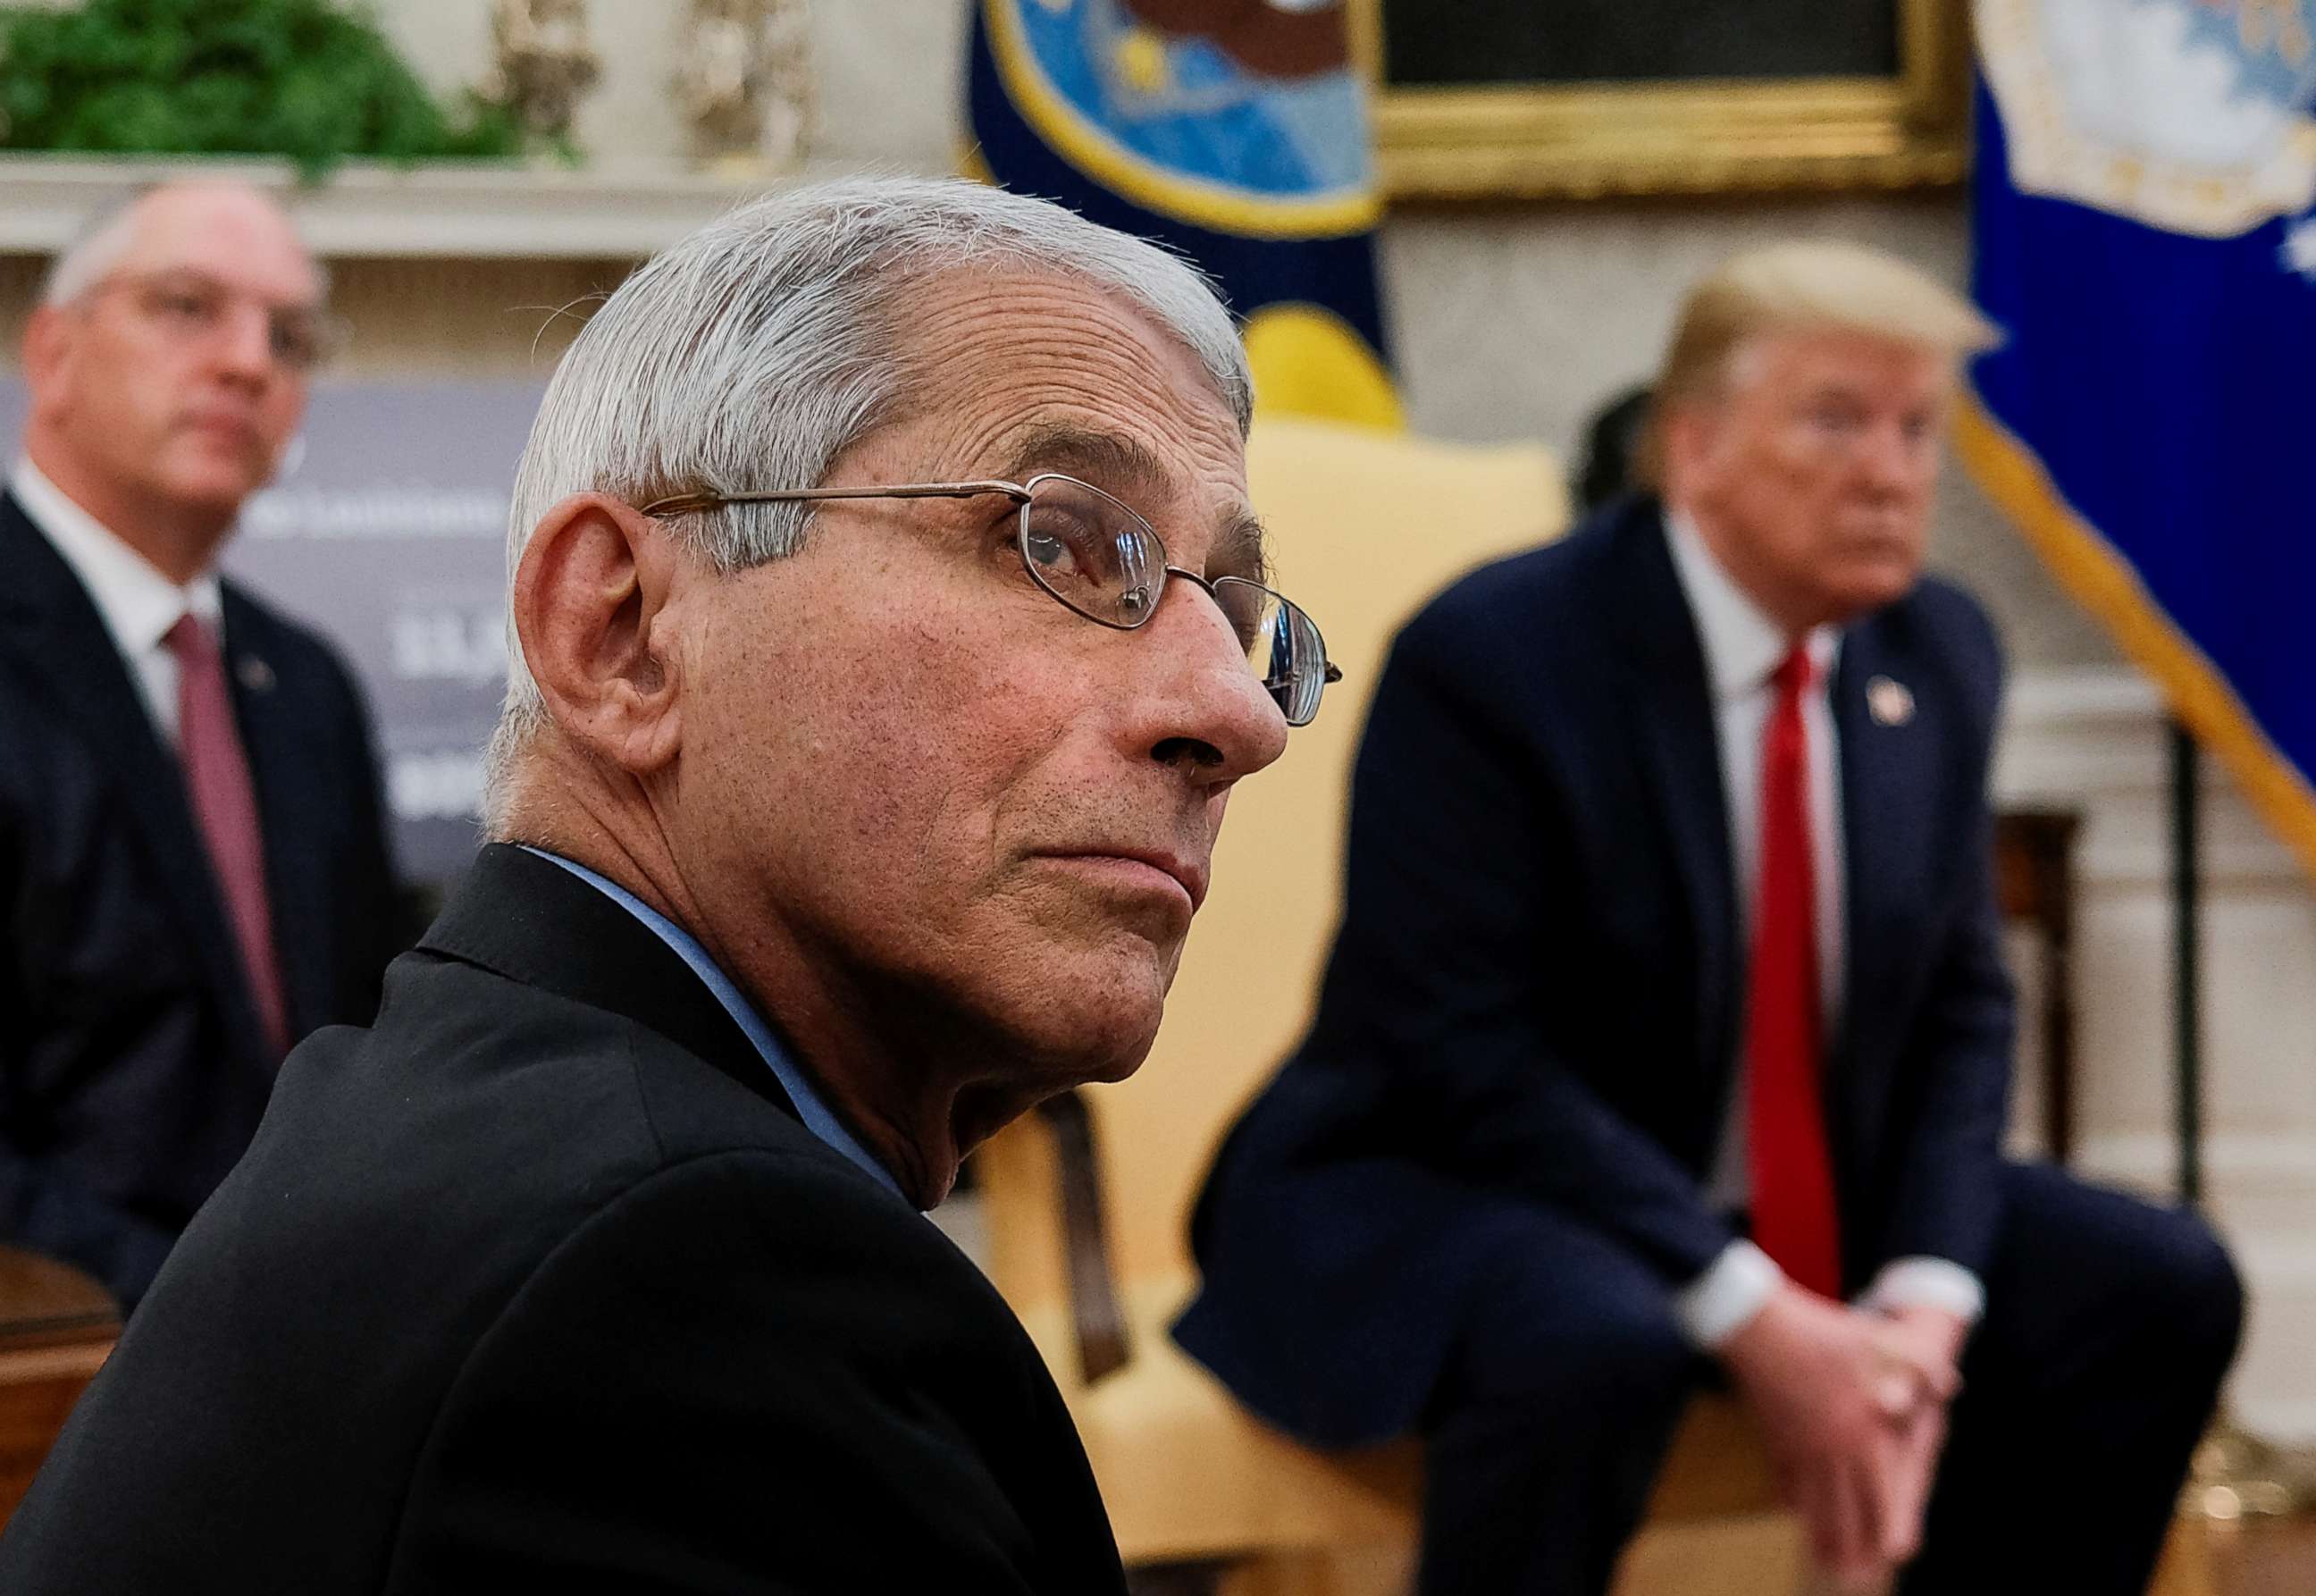 PHOTO: National Institute of Allergy and Infectious Diseases Director Dr. Anthony Fauci attends a coronavirus response meeting between President Donald Trump and Louisiana Governor John Bel Edwards at the White House in Washington, April 29, 2020.